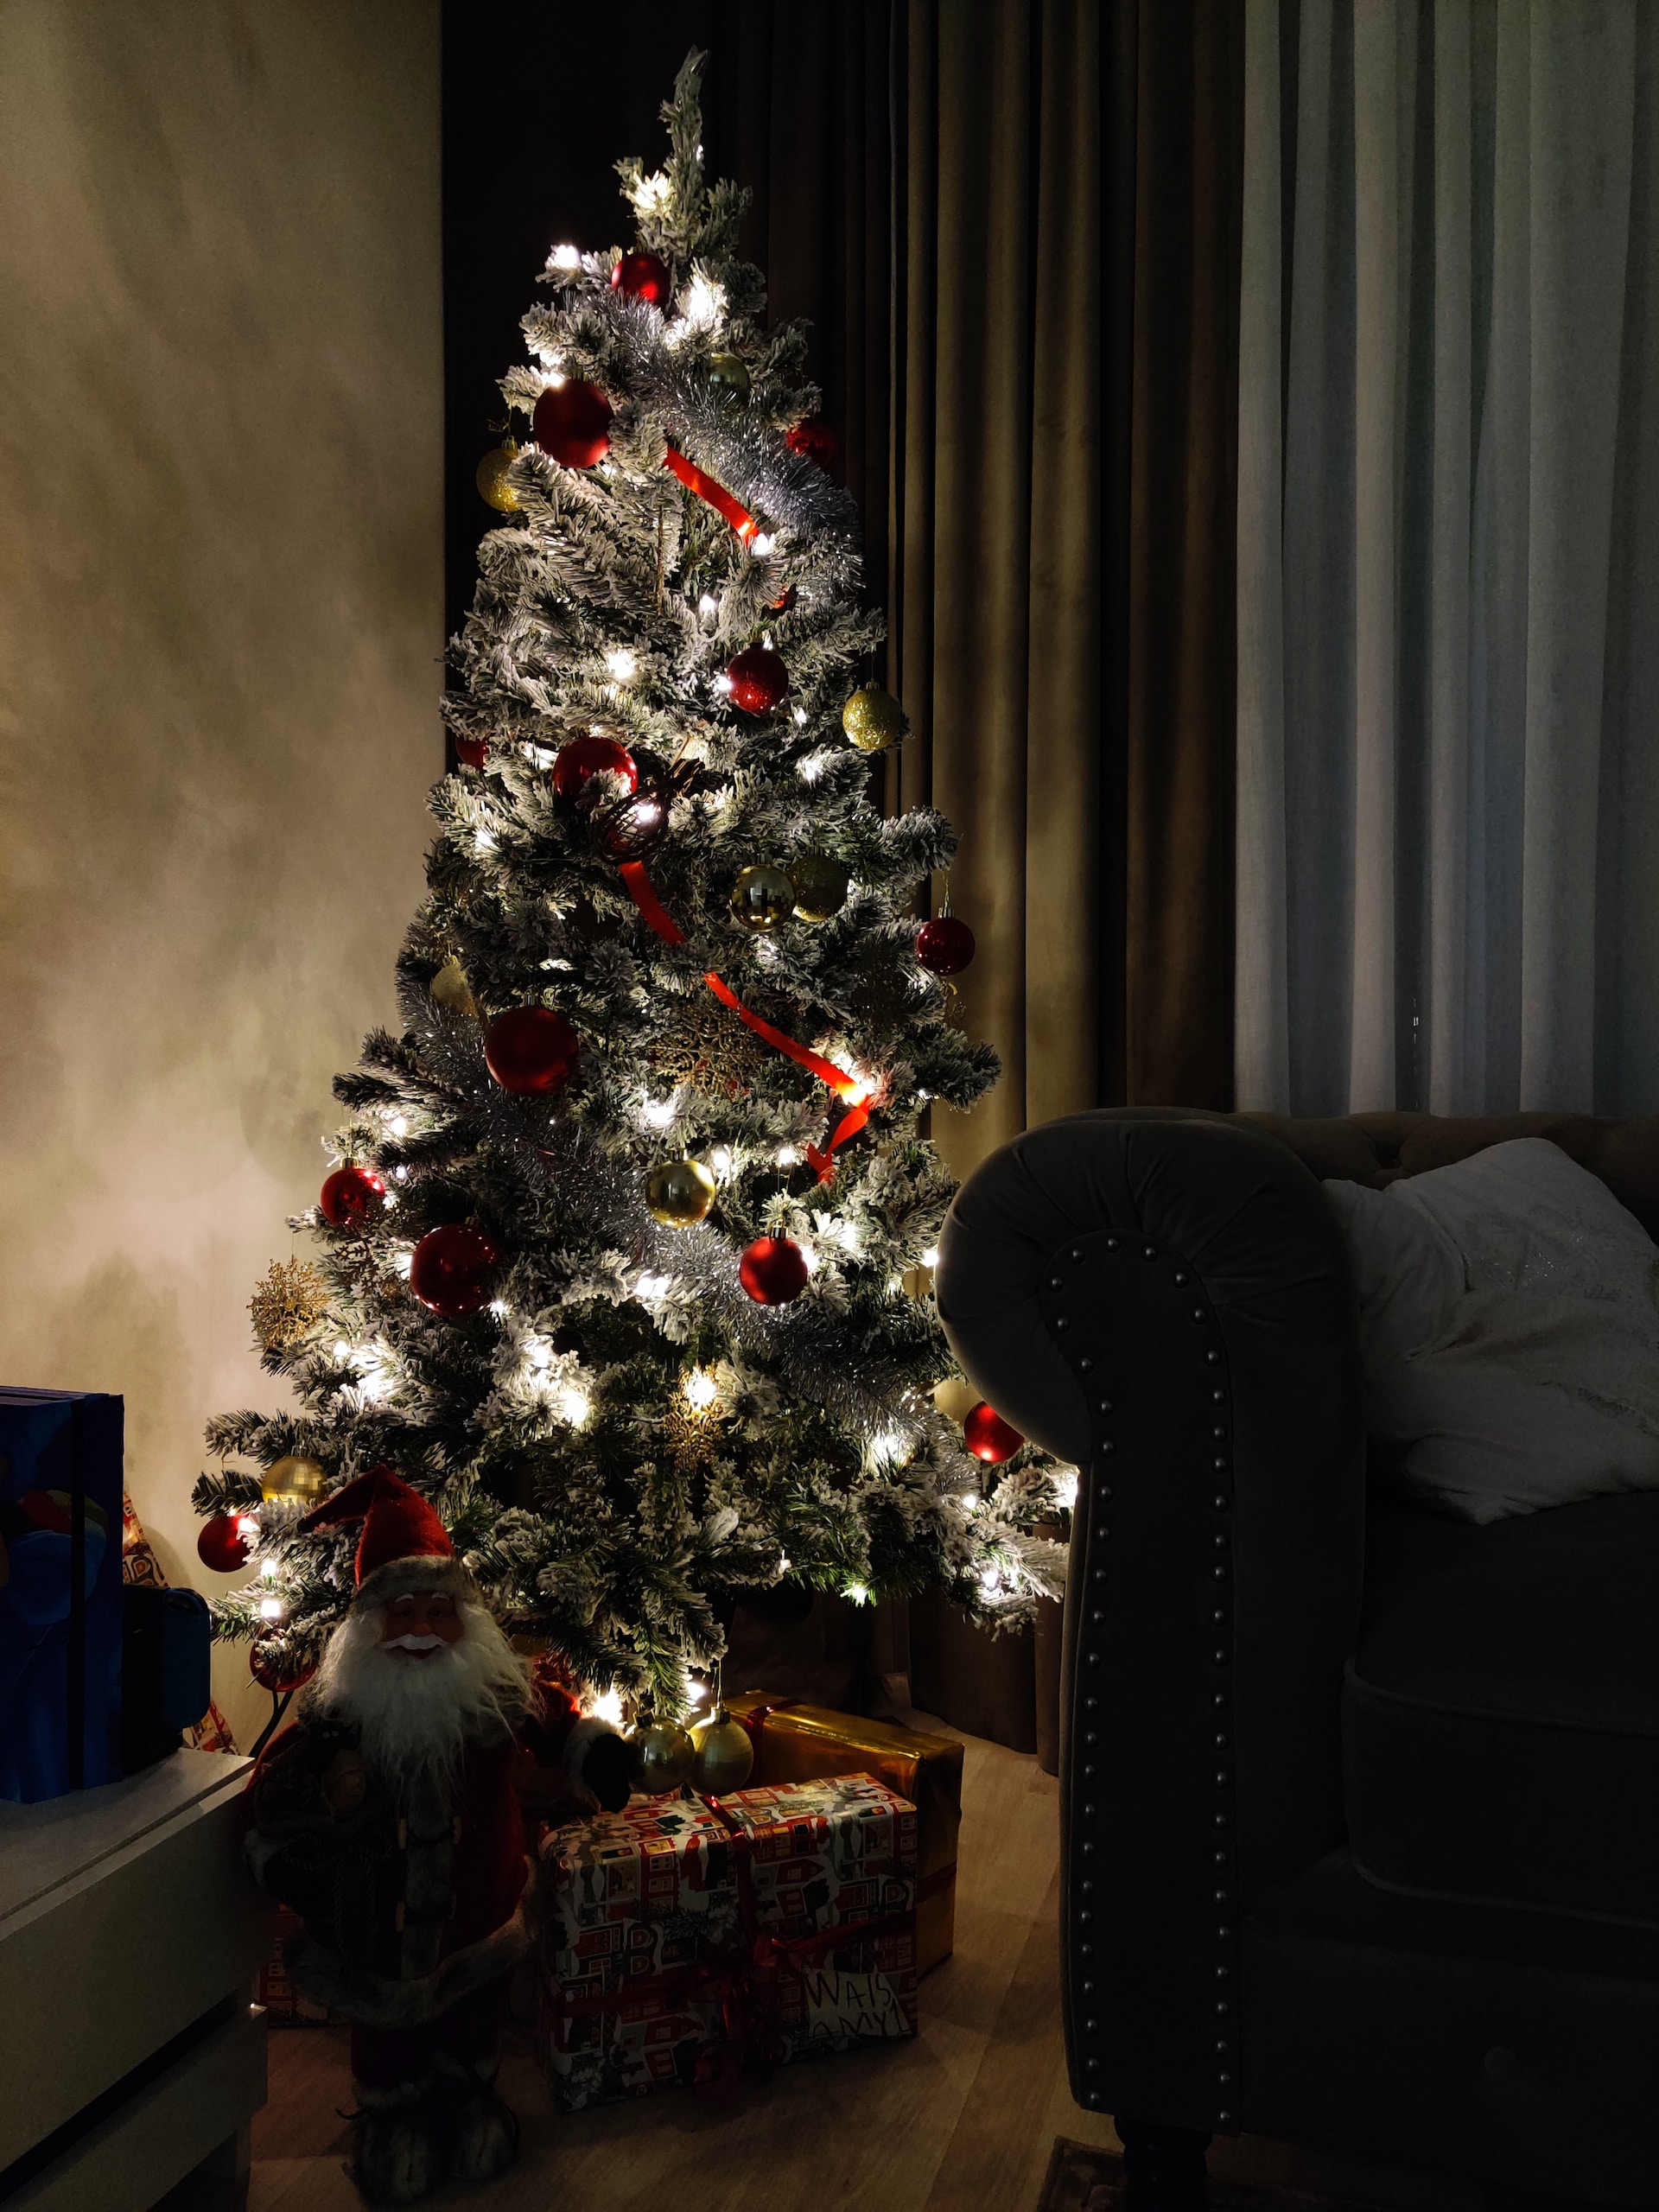 A decorated Christmas tree in a room.